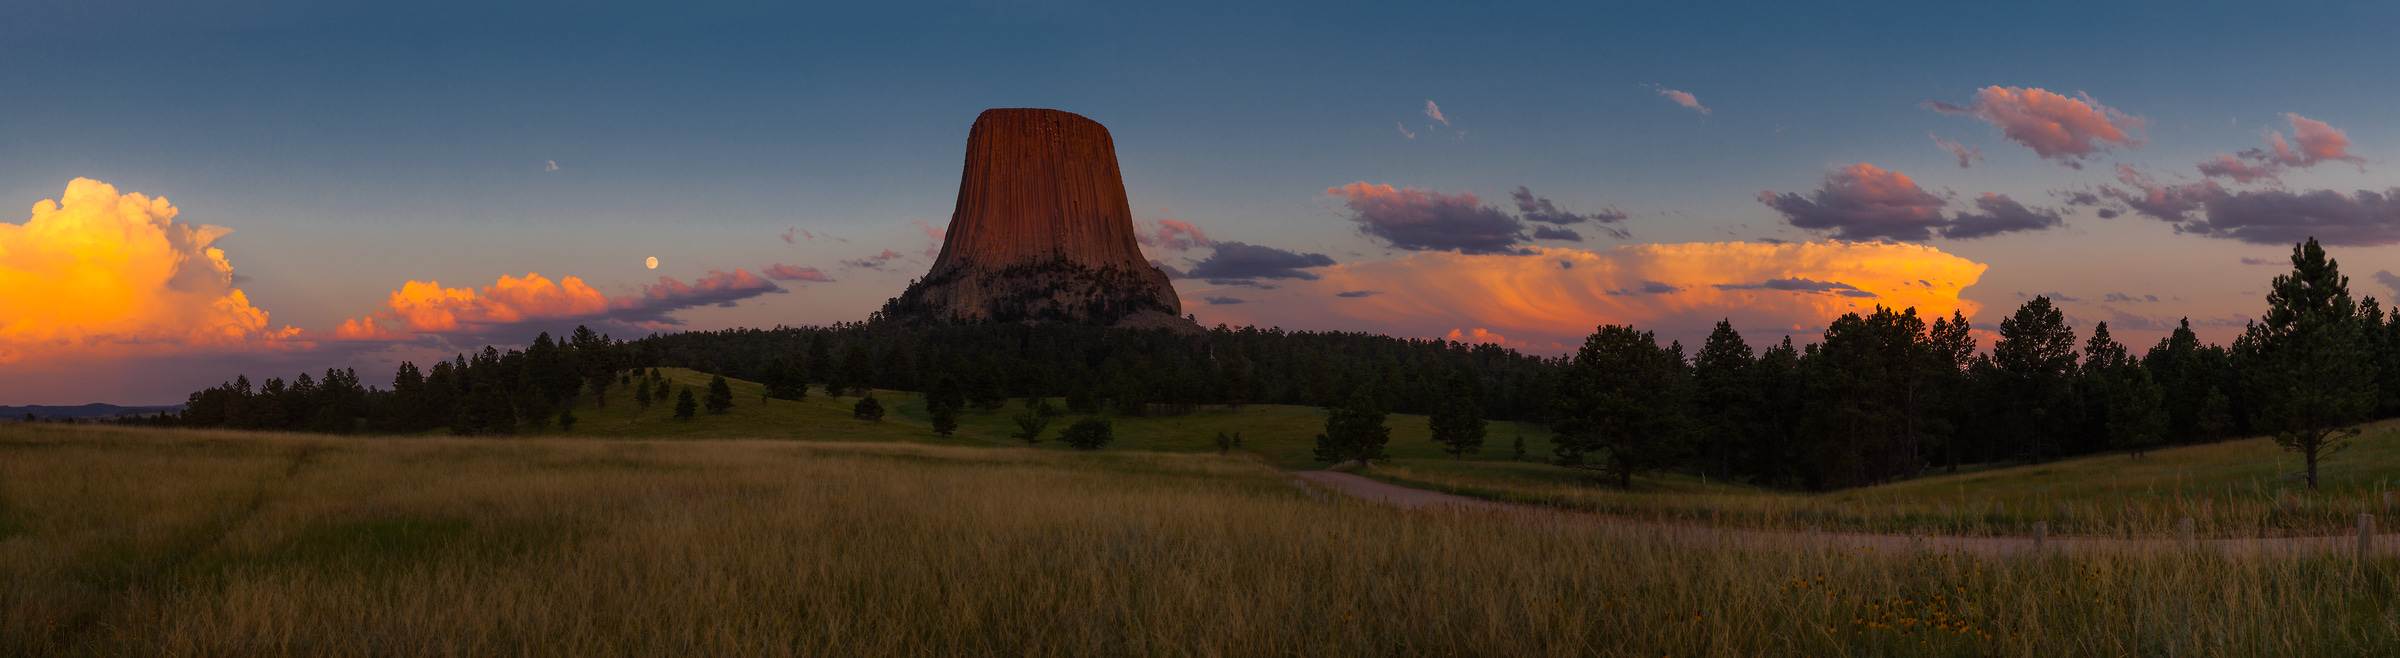 108 megapixels! A very high resolution, large-format VAST photo print of a Wyoming panorama with Devils Tower; landscape photograph created by Phillip Noll in Devils Tower National Monument, Wyoming.